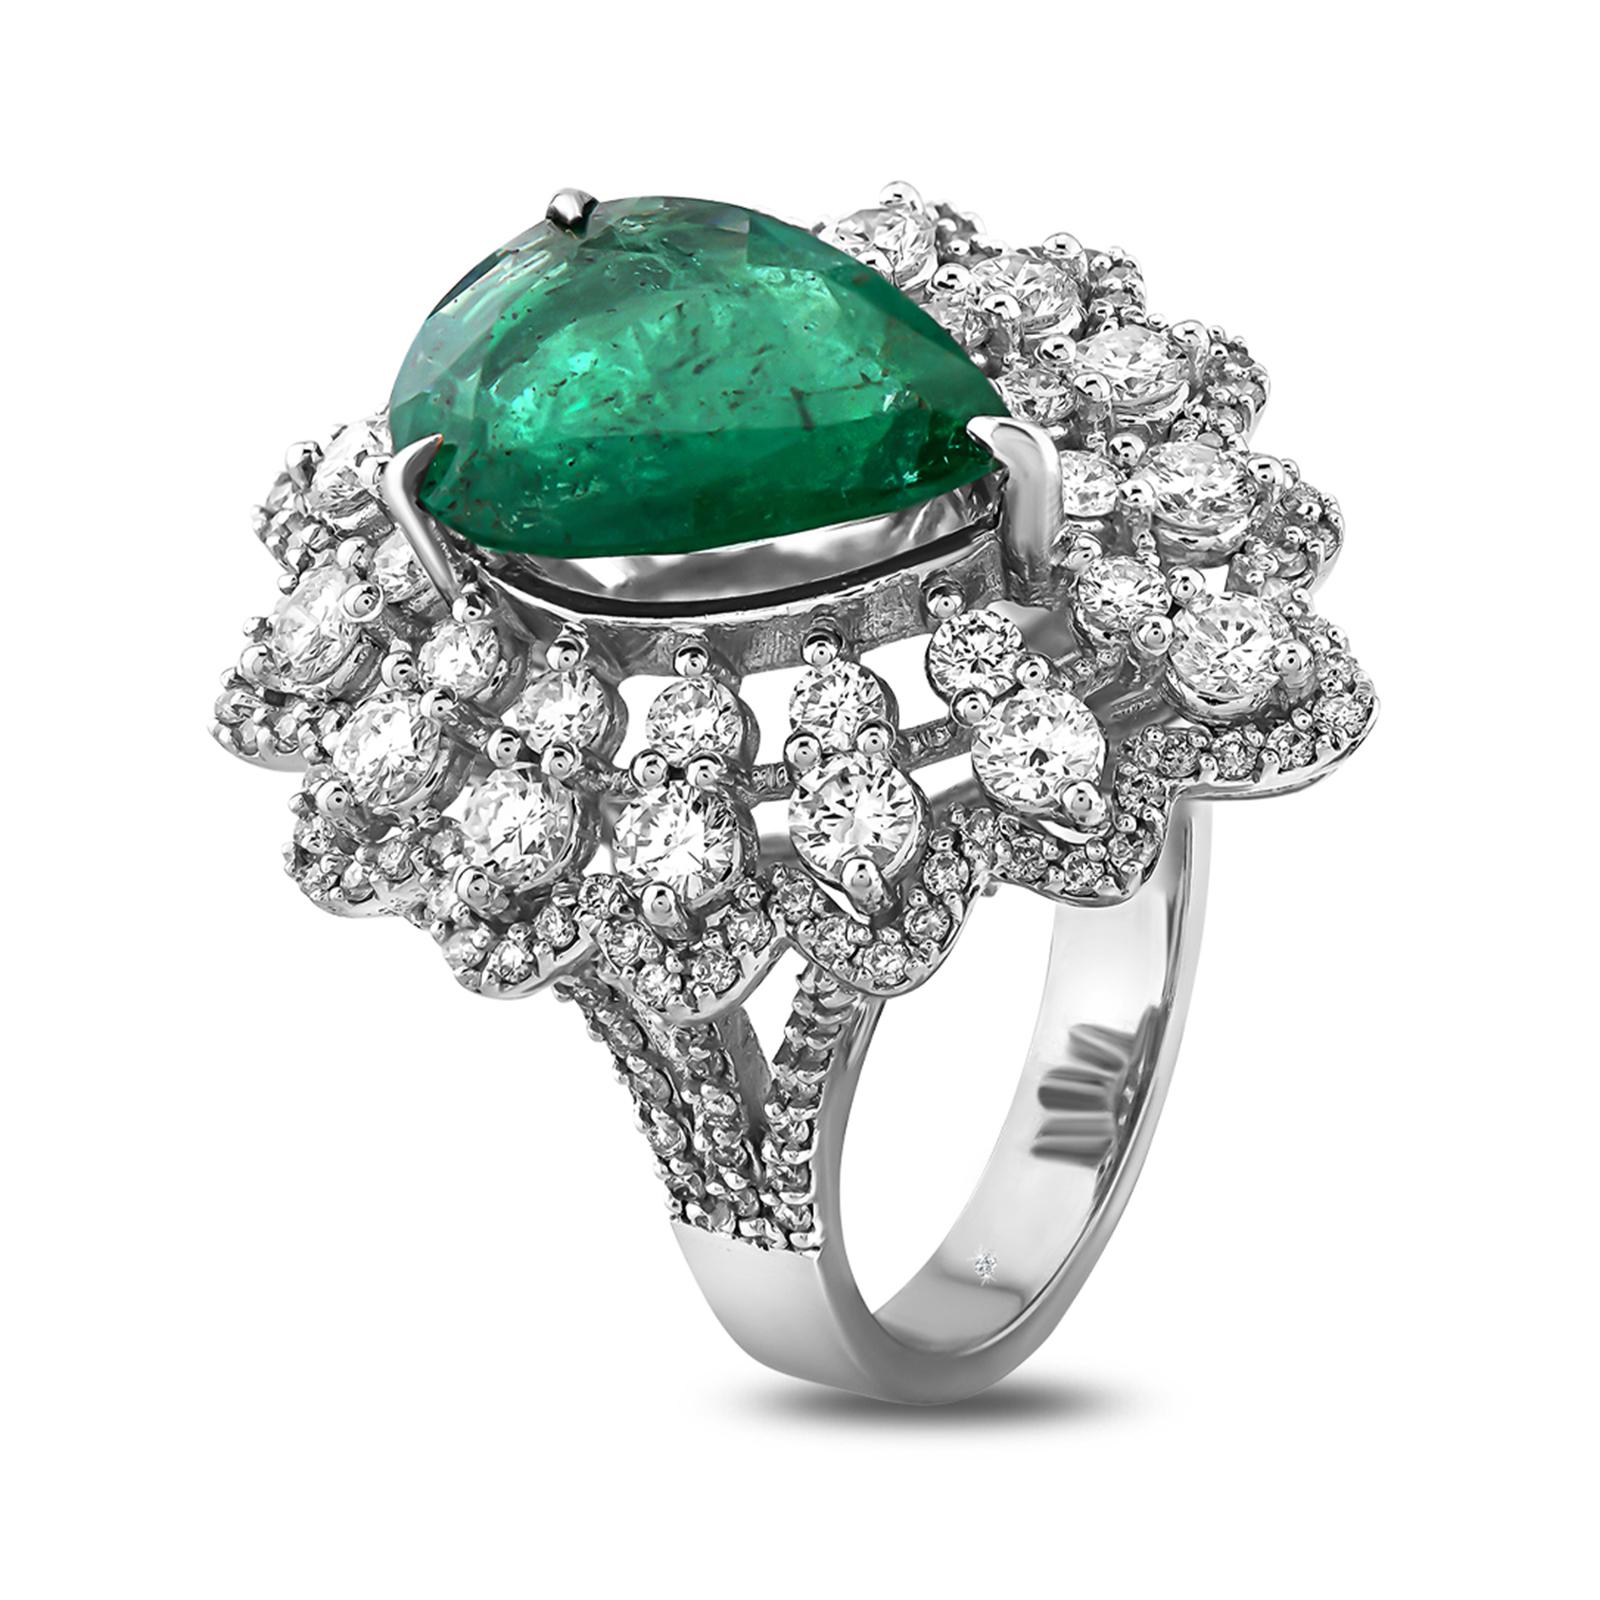 For Sale:  5.82 Carat Pear Shaped Emerald and Diamond Cocktail Ring 18 Karat White Gold 5